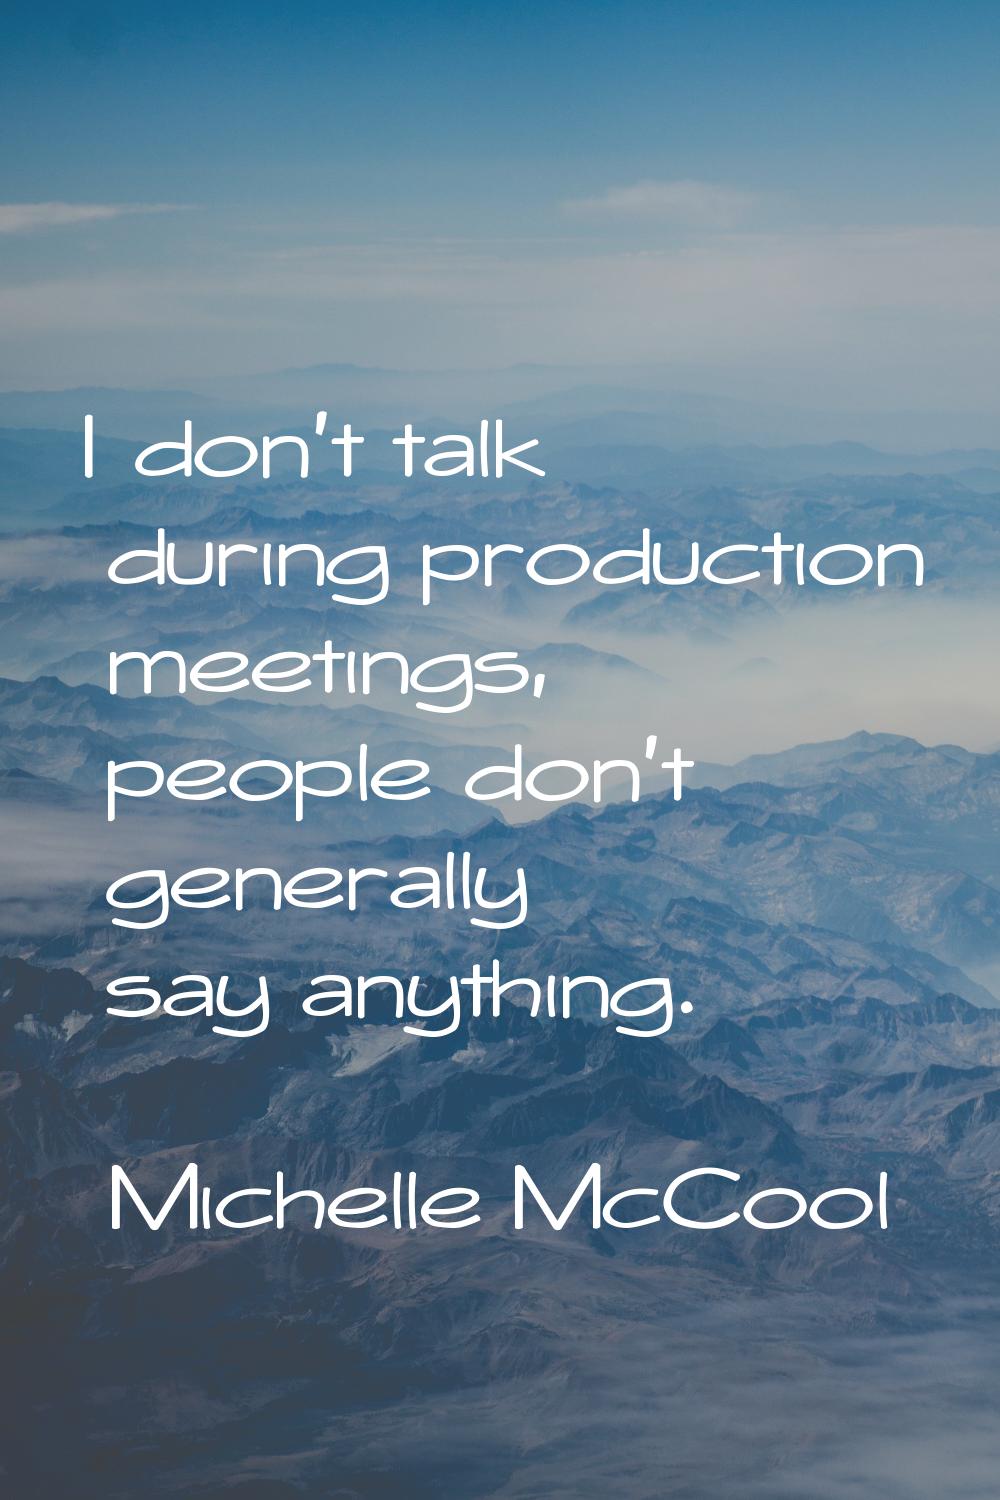 I don't talk during production meetings, people don't generally say anything.